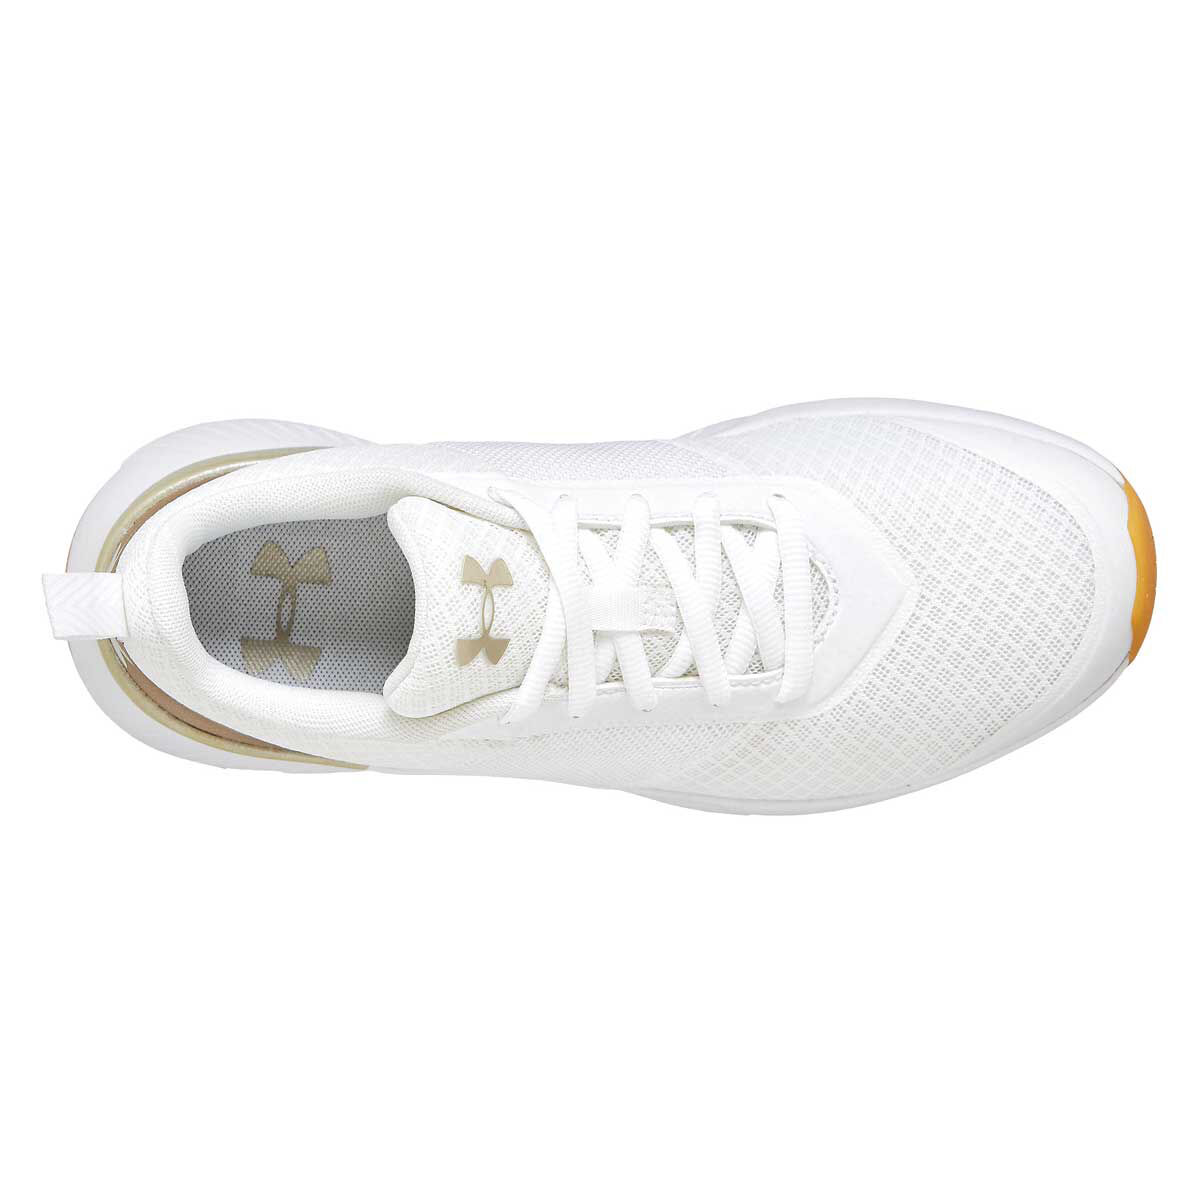 white under armour tennis shoes